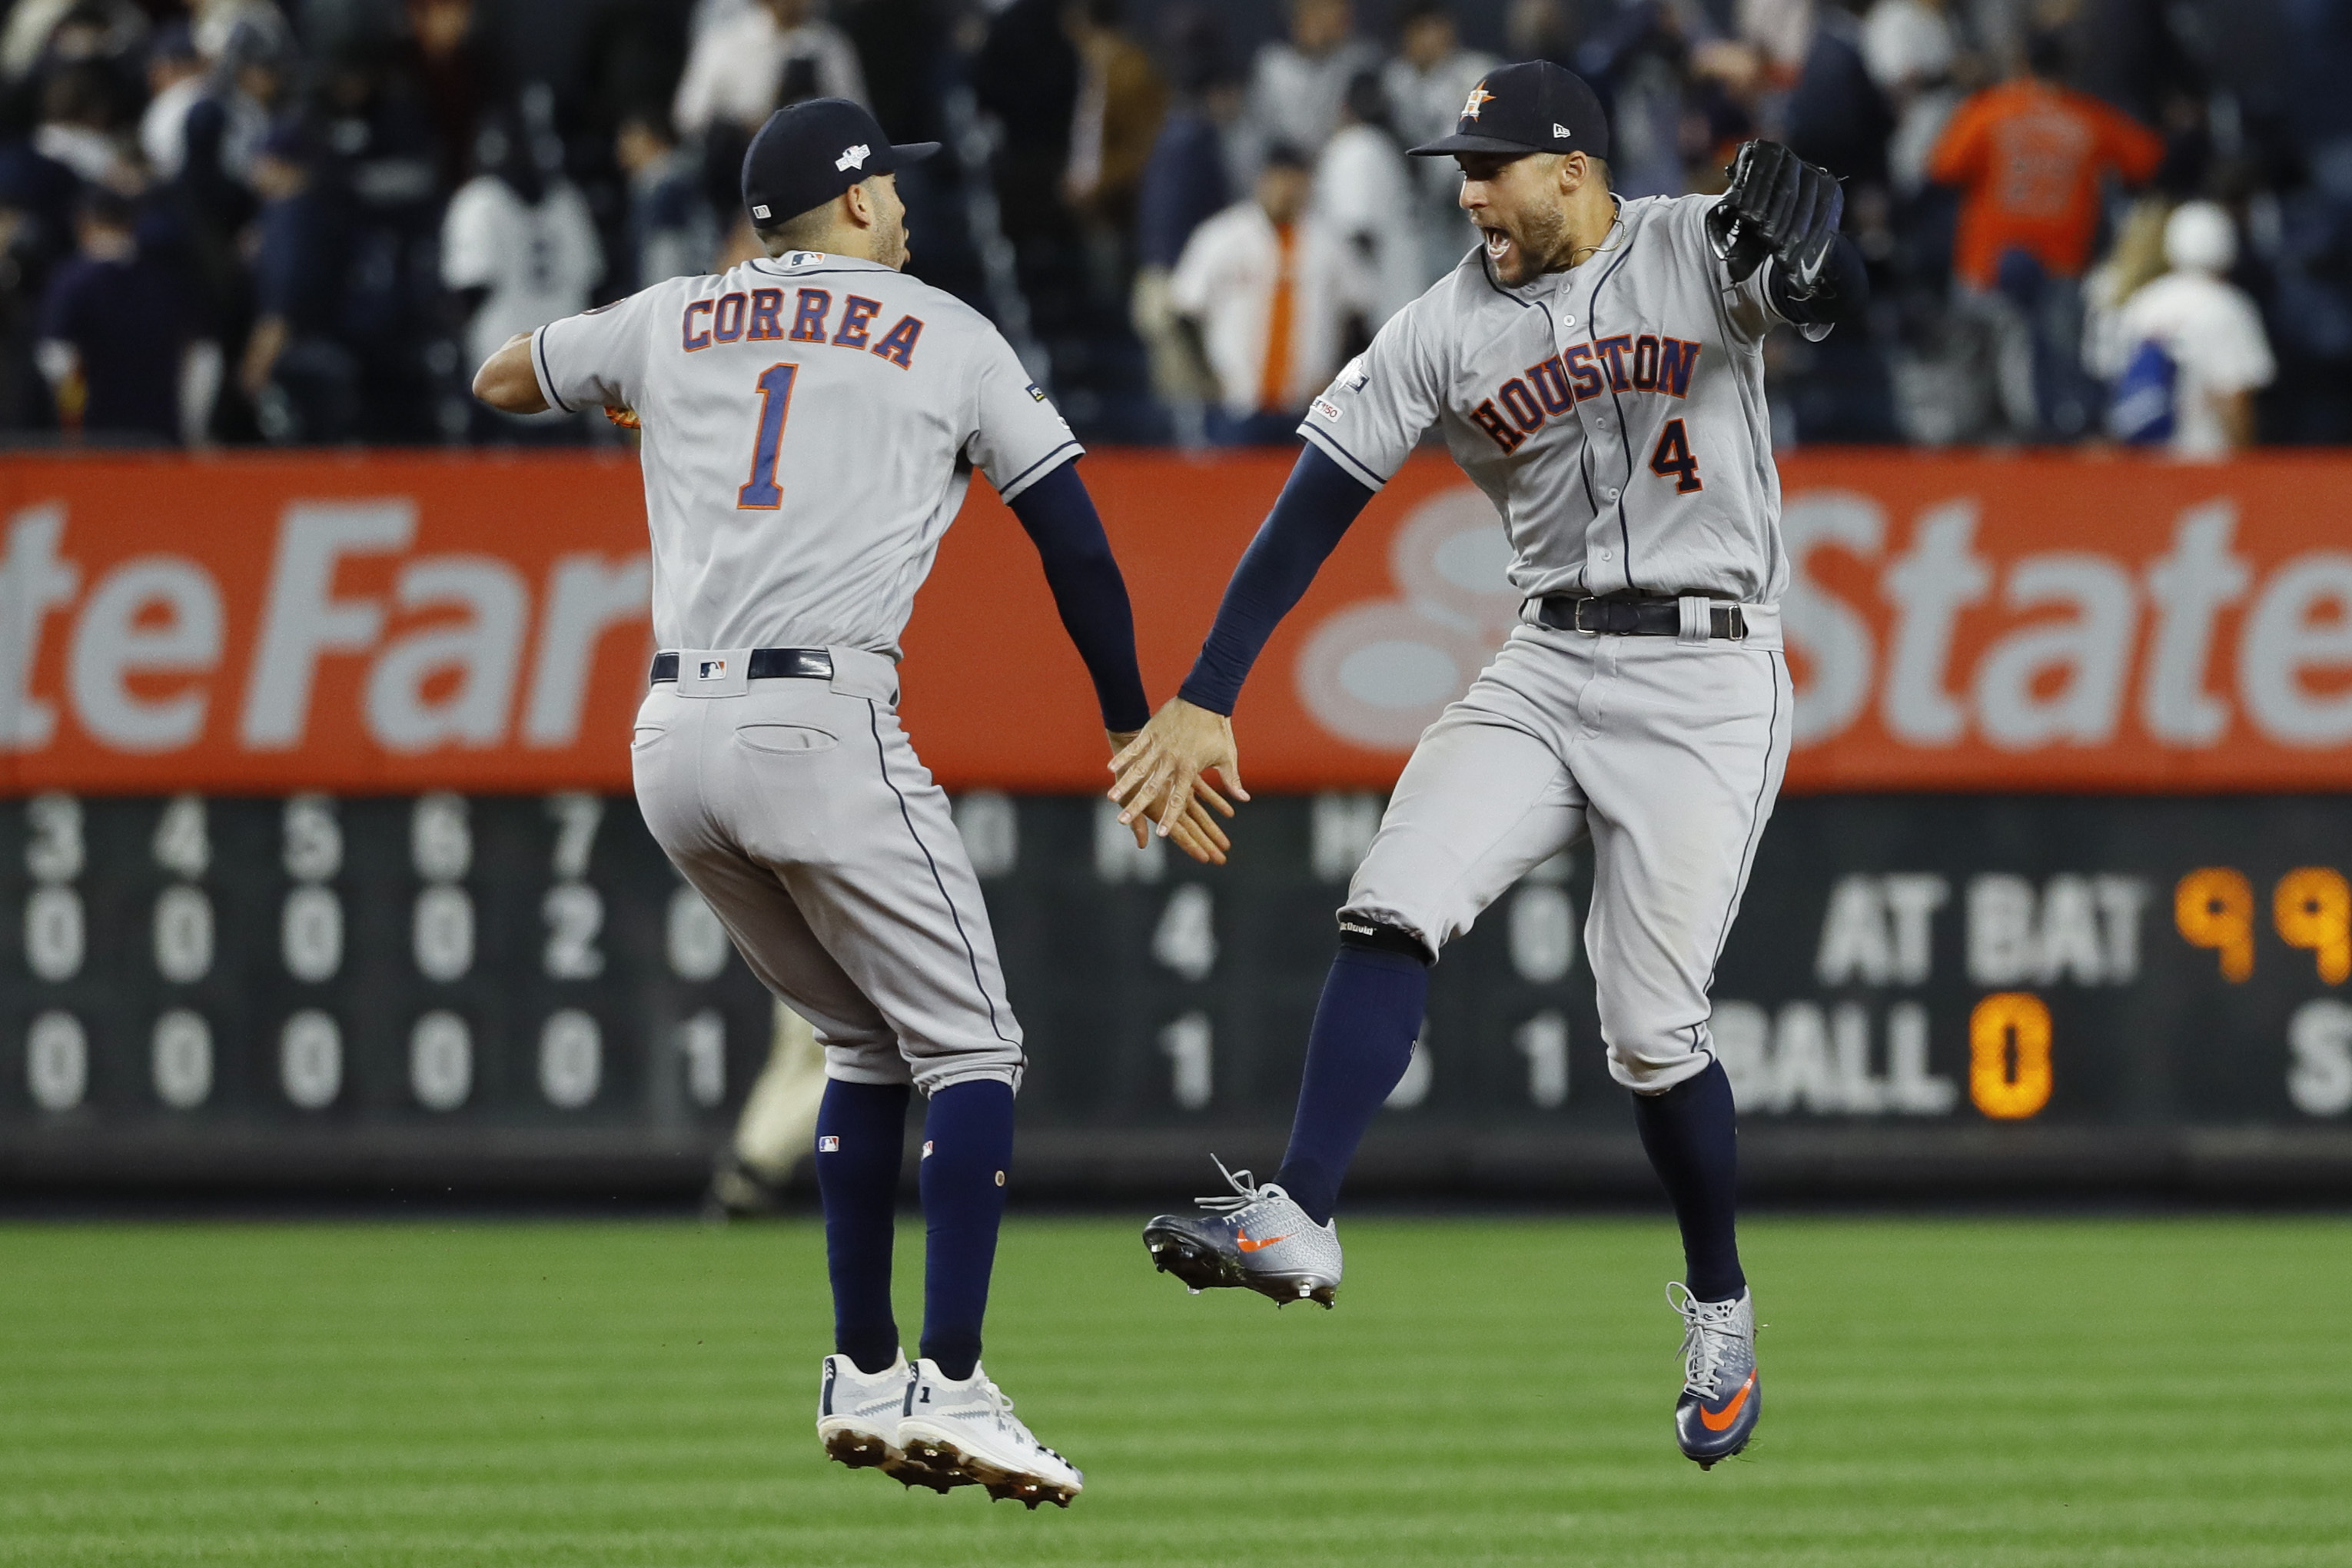 Yankees vs. Astros 2017 live results: Score updates and highlights from  ALCS Game 1 